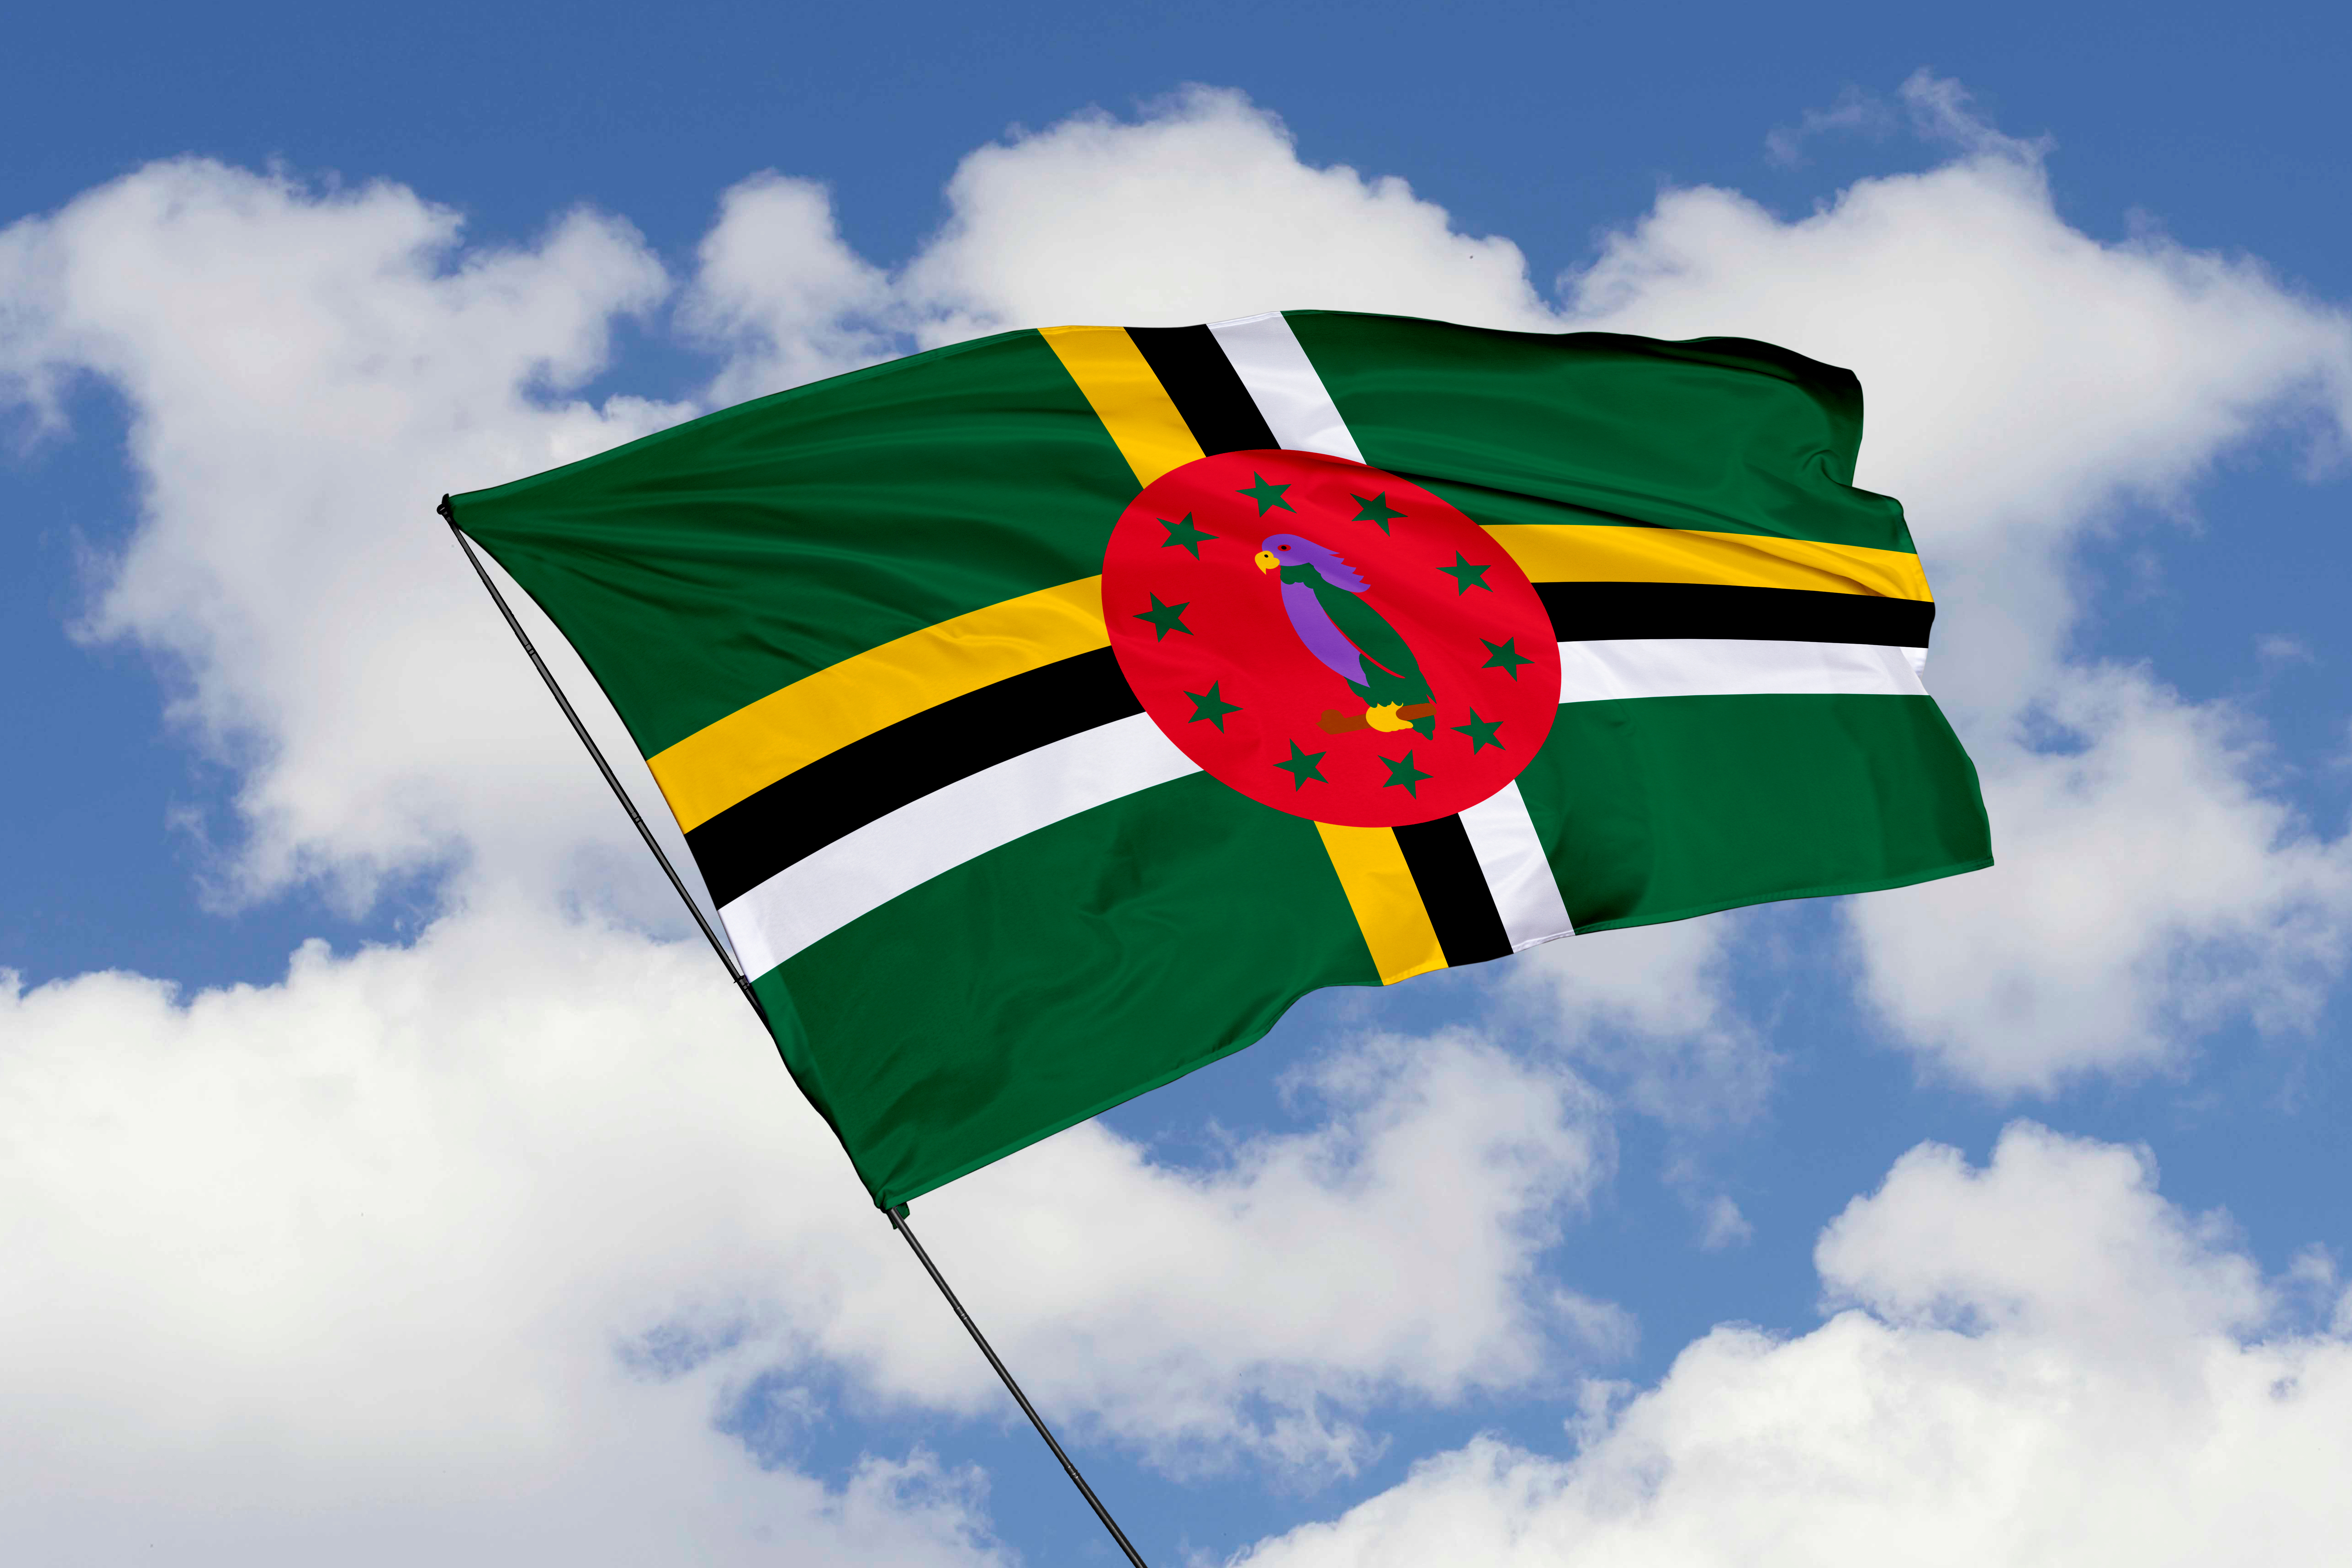 The flag symbolizes Dominica citizenship by investment